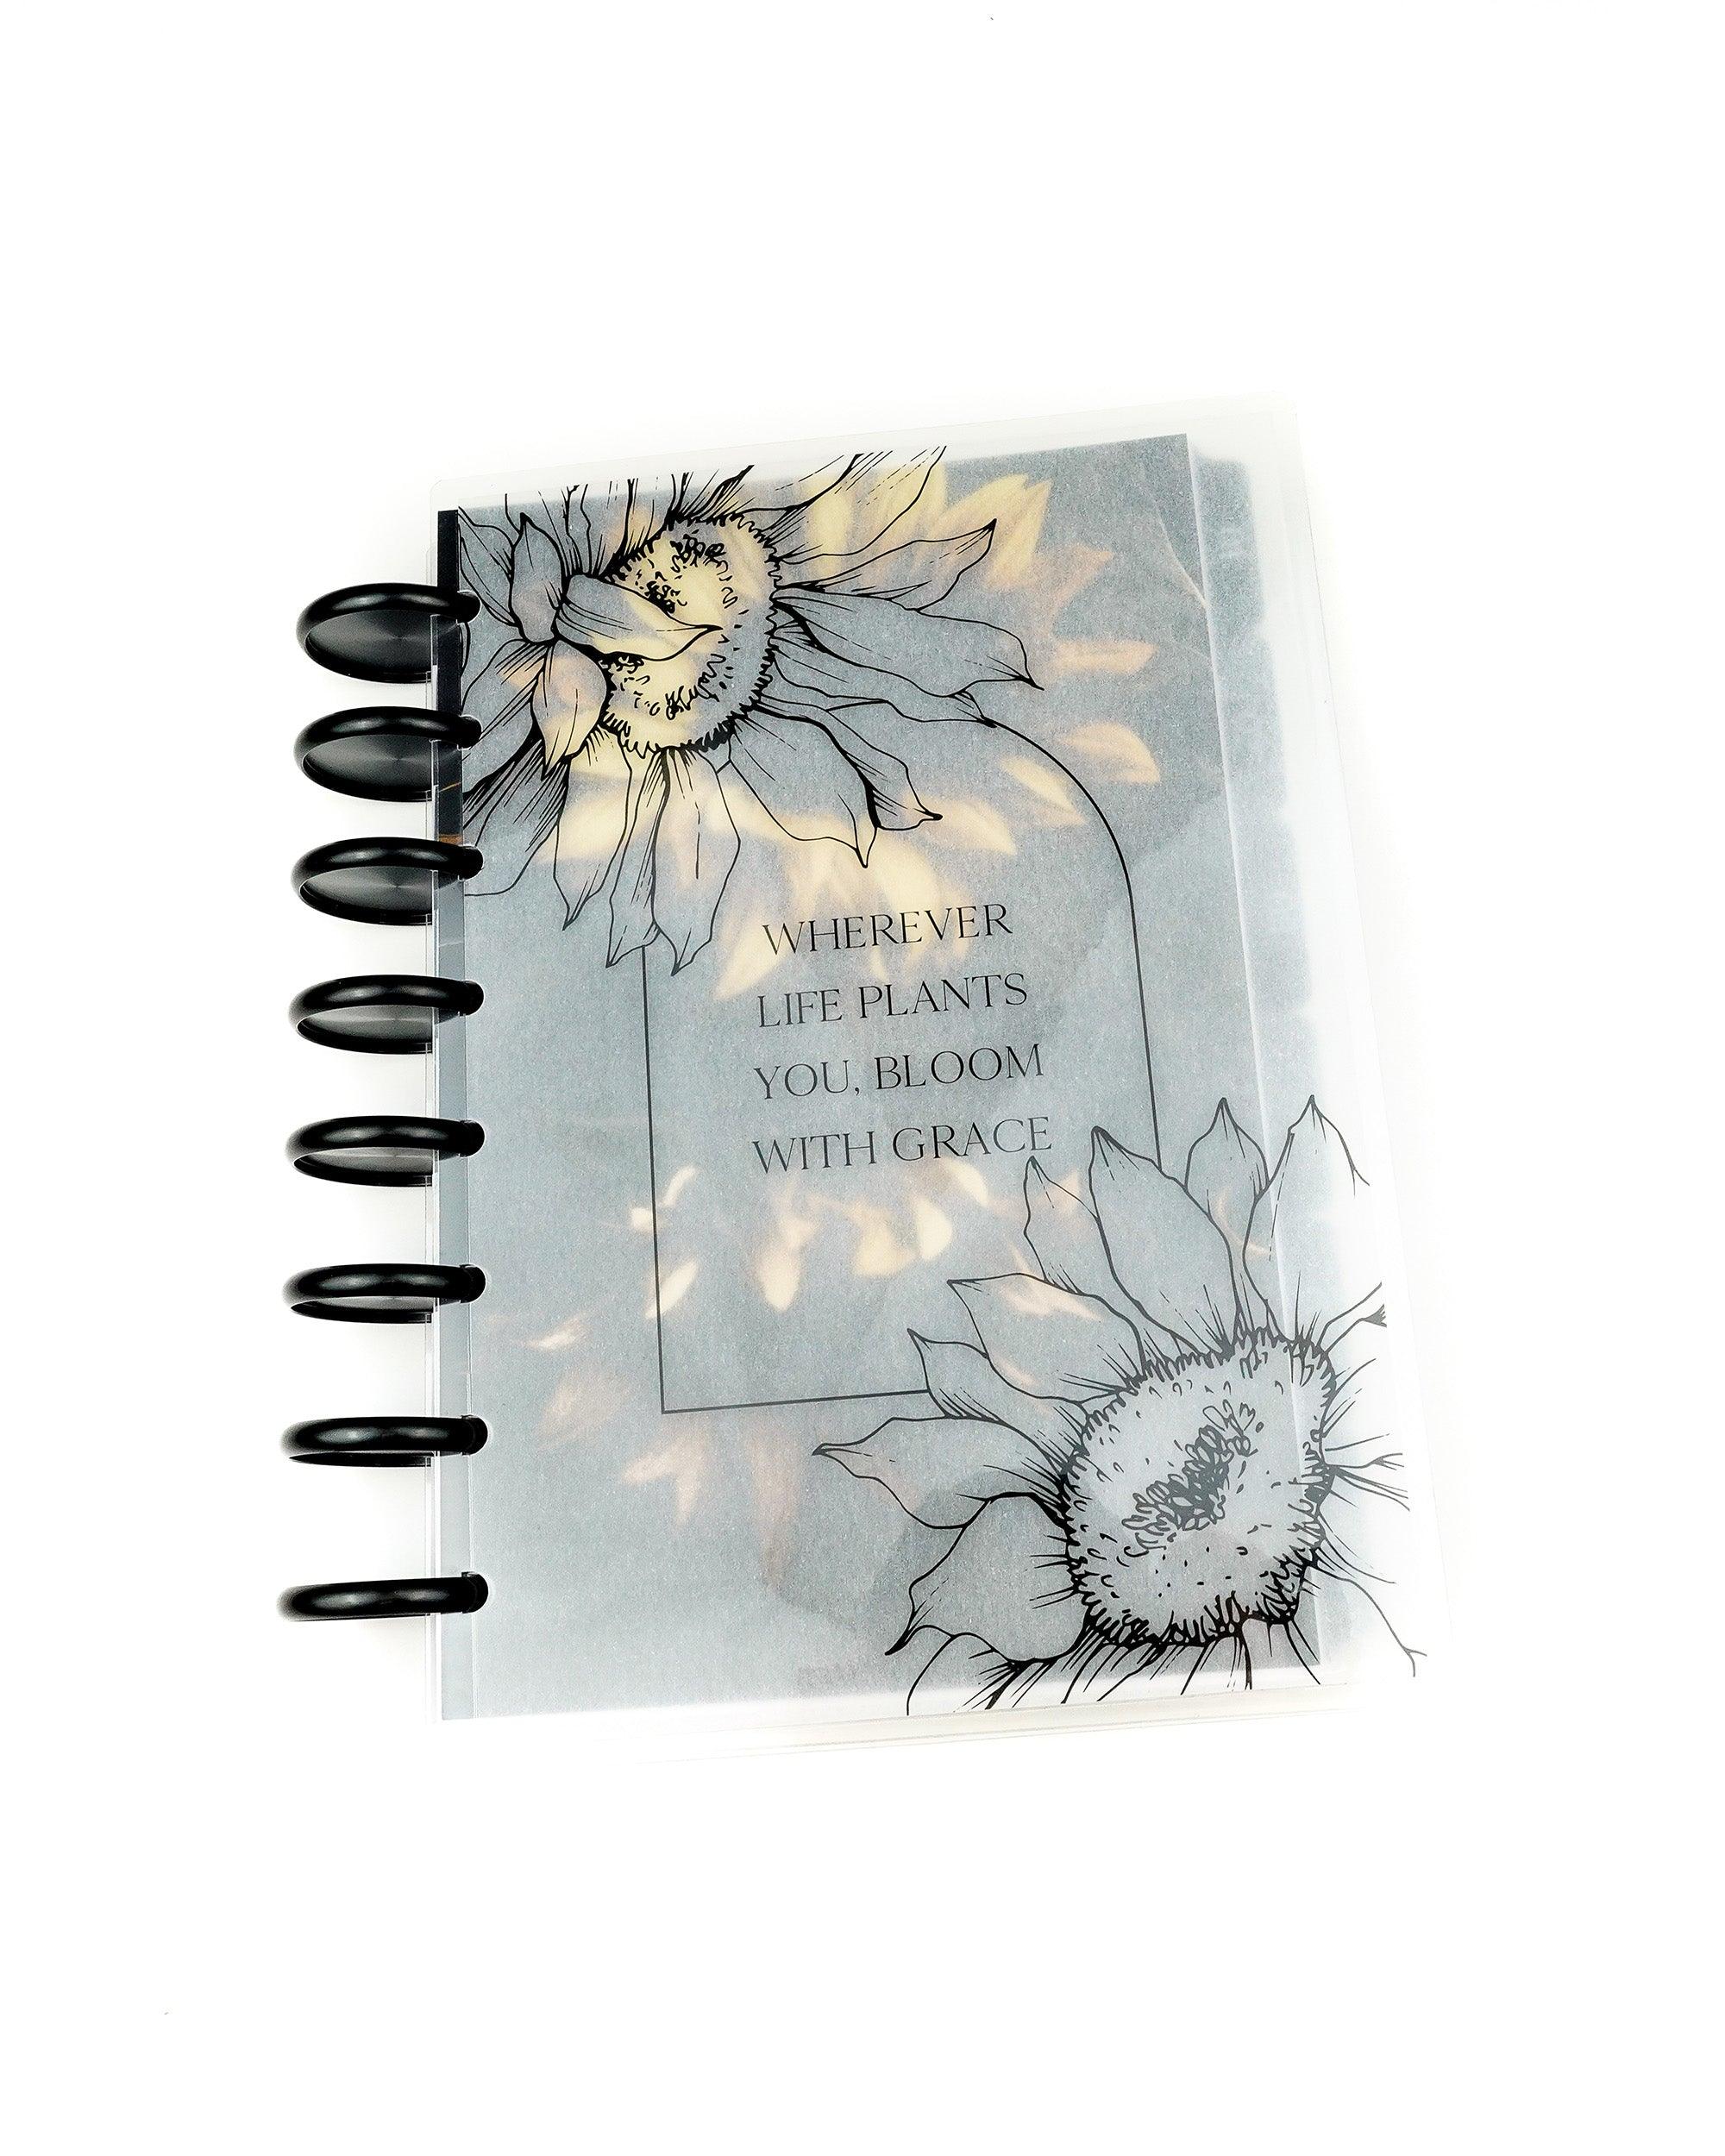 Sunflower planner cover for discbound planners and disc notebooks by Jane's Agneda.